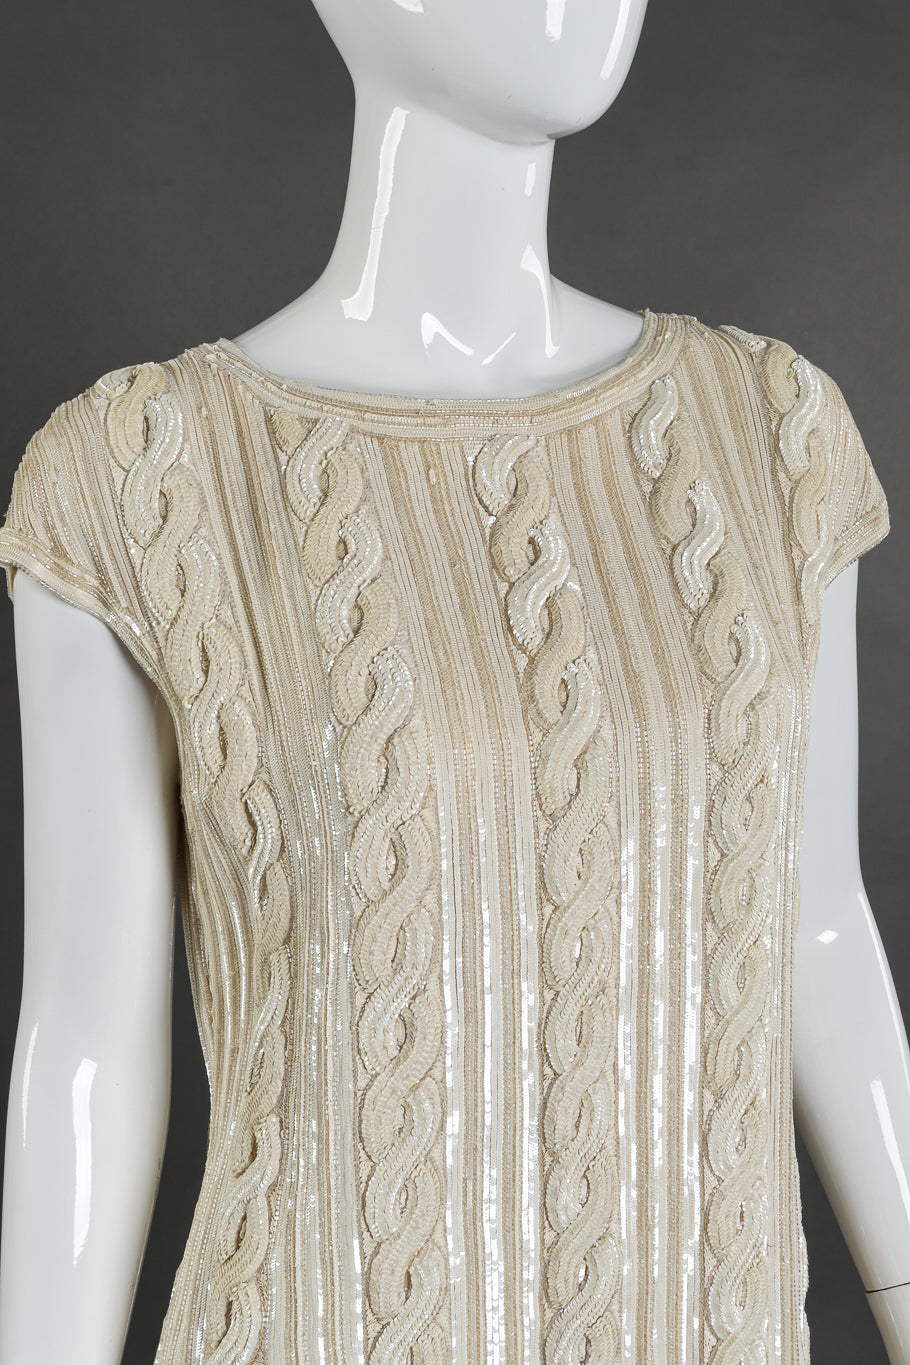 Vintage Valentino Night Cable Knit Sequin Top front on mannequin closeup @recessla